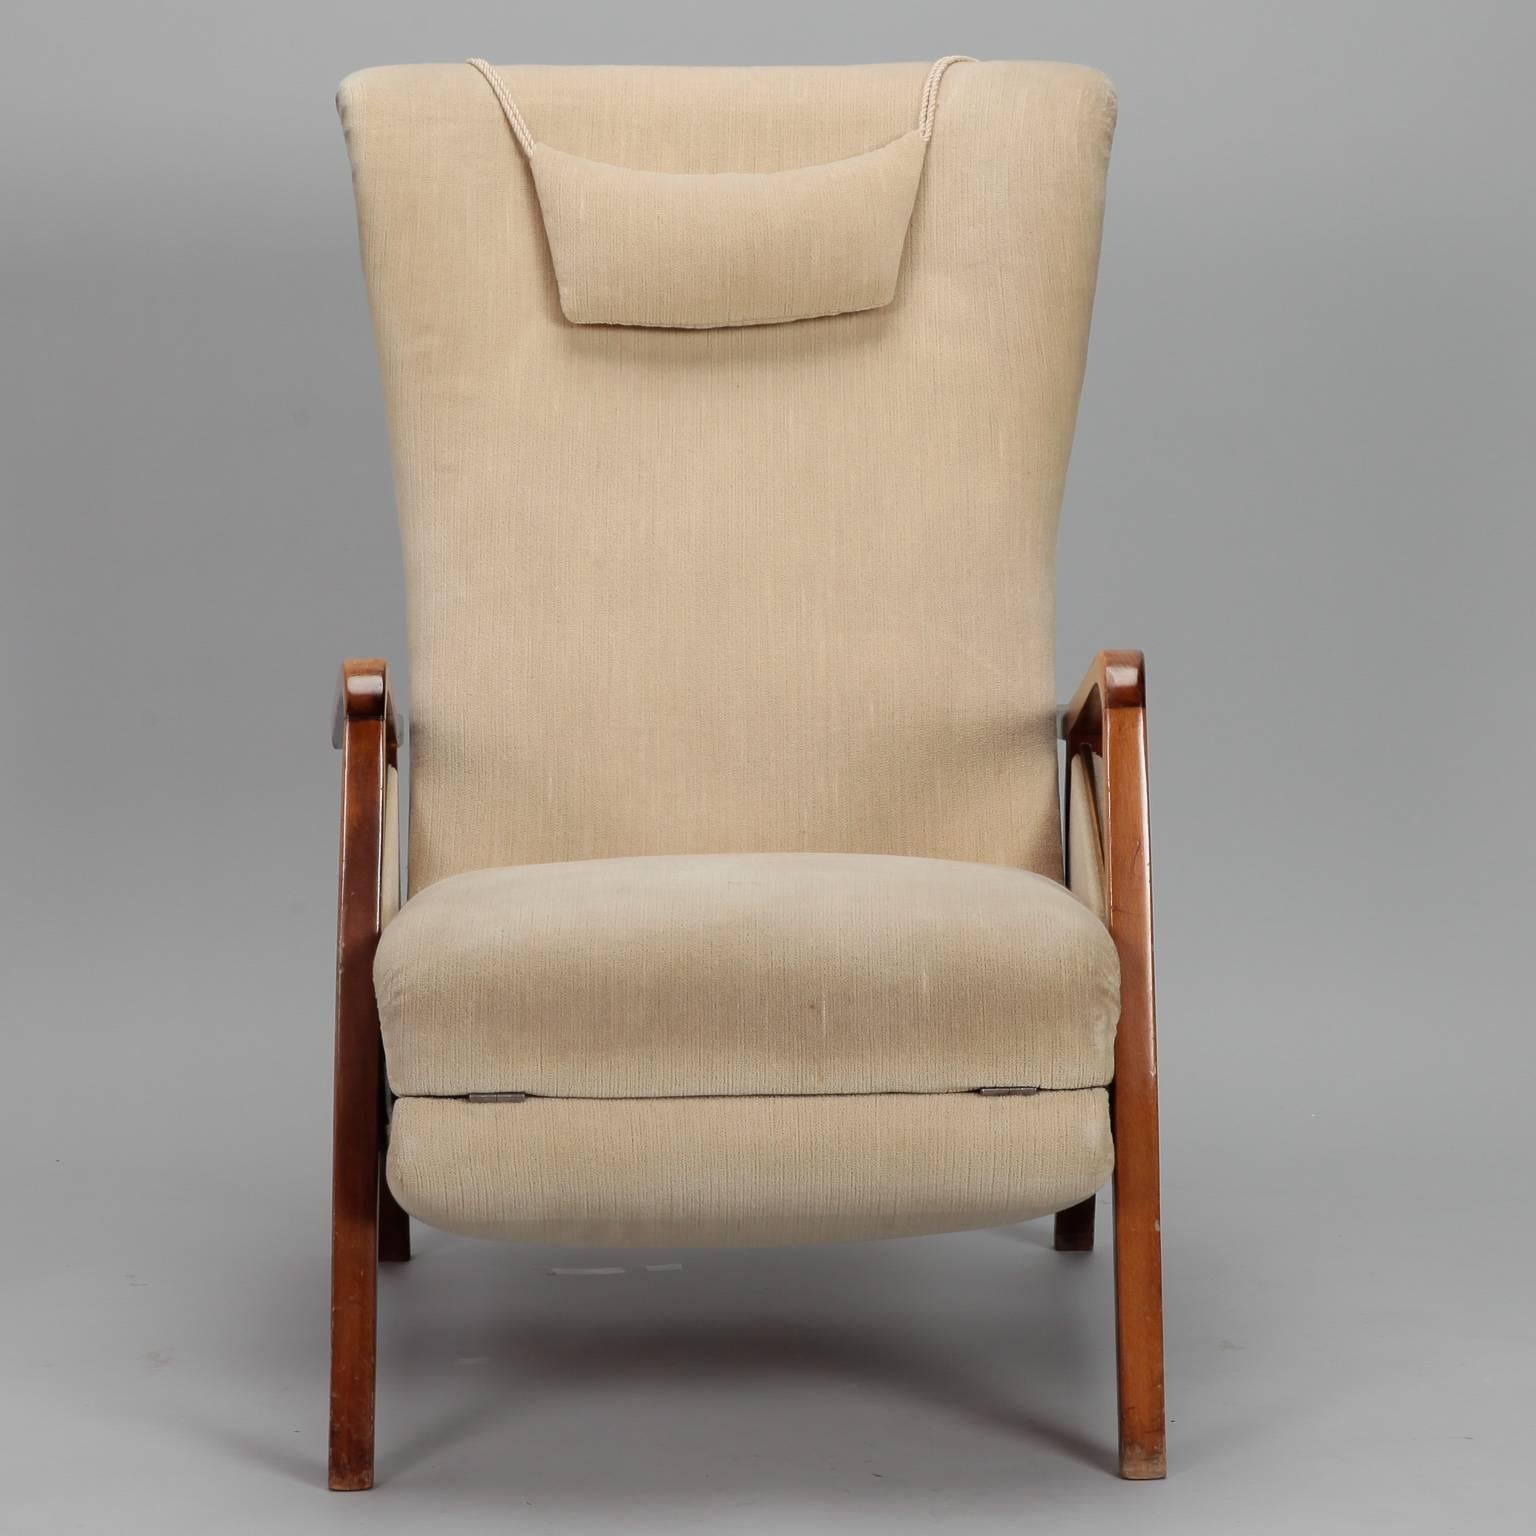 European Mid-Century Reclining Chair in the Manner of Paola Buffa